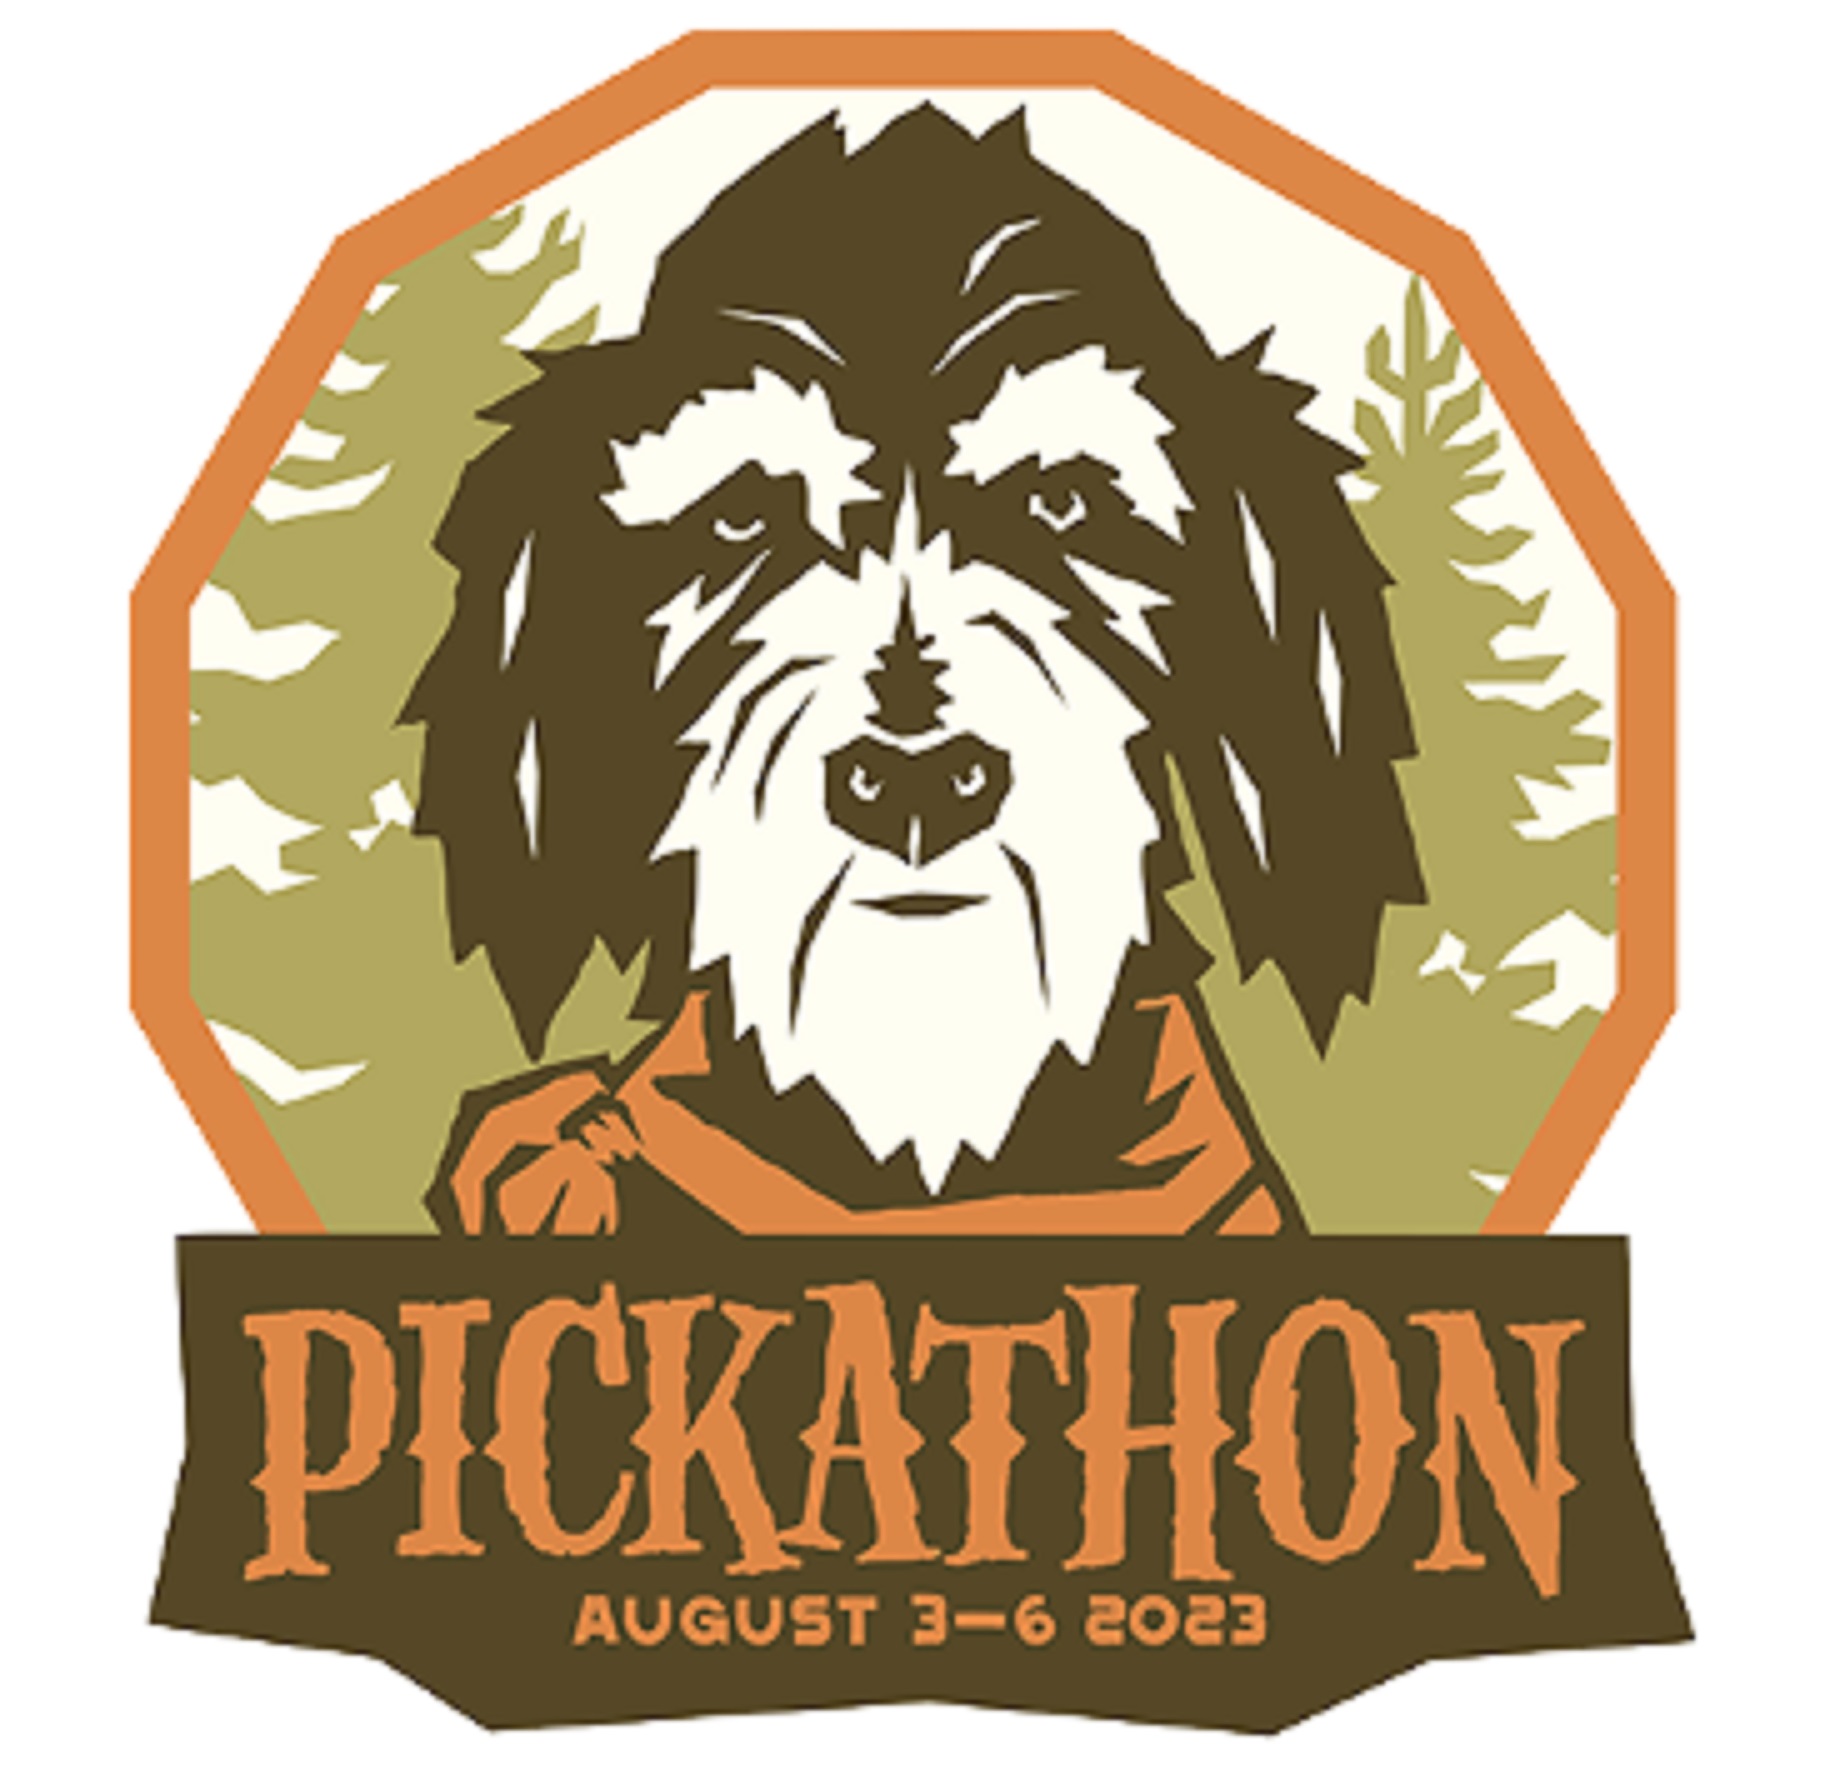 Pickathon Announces Comedy and DJs Lineups + Three Artists Added to Music Lineup